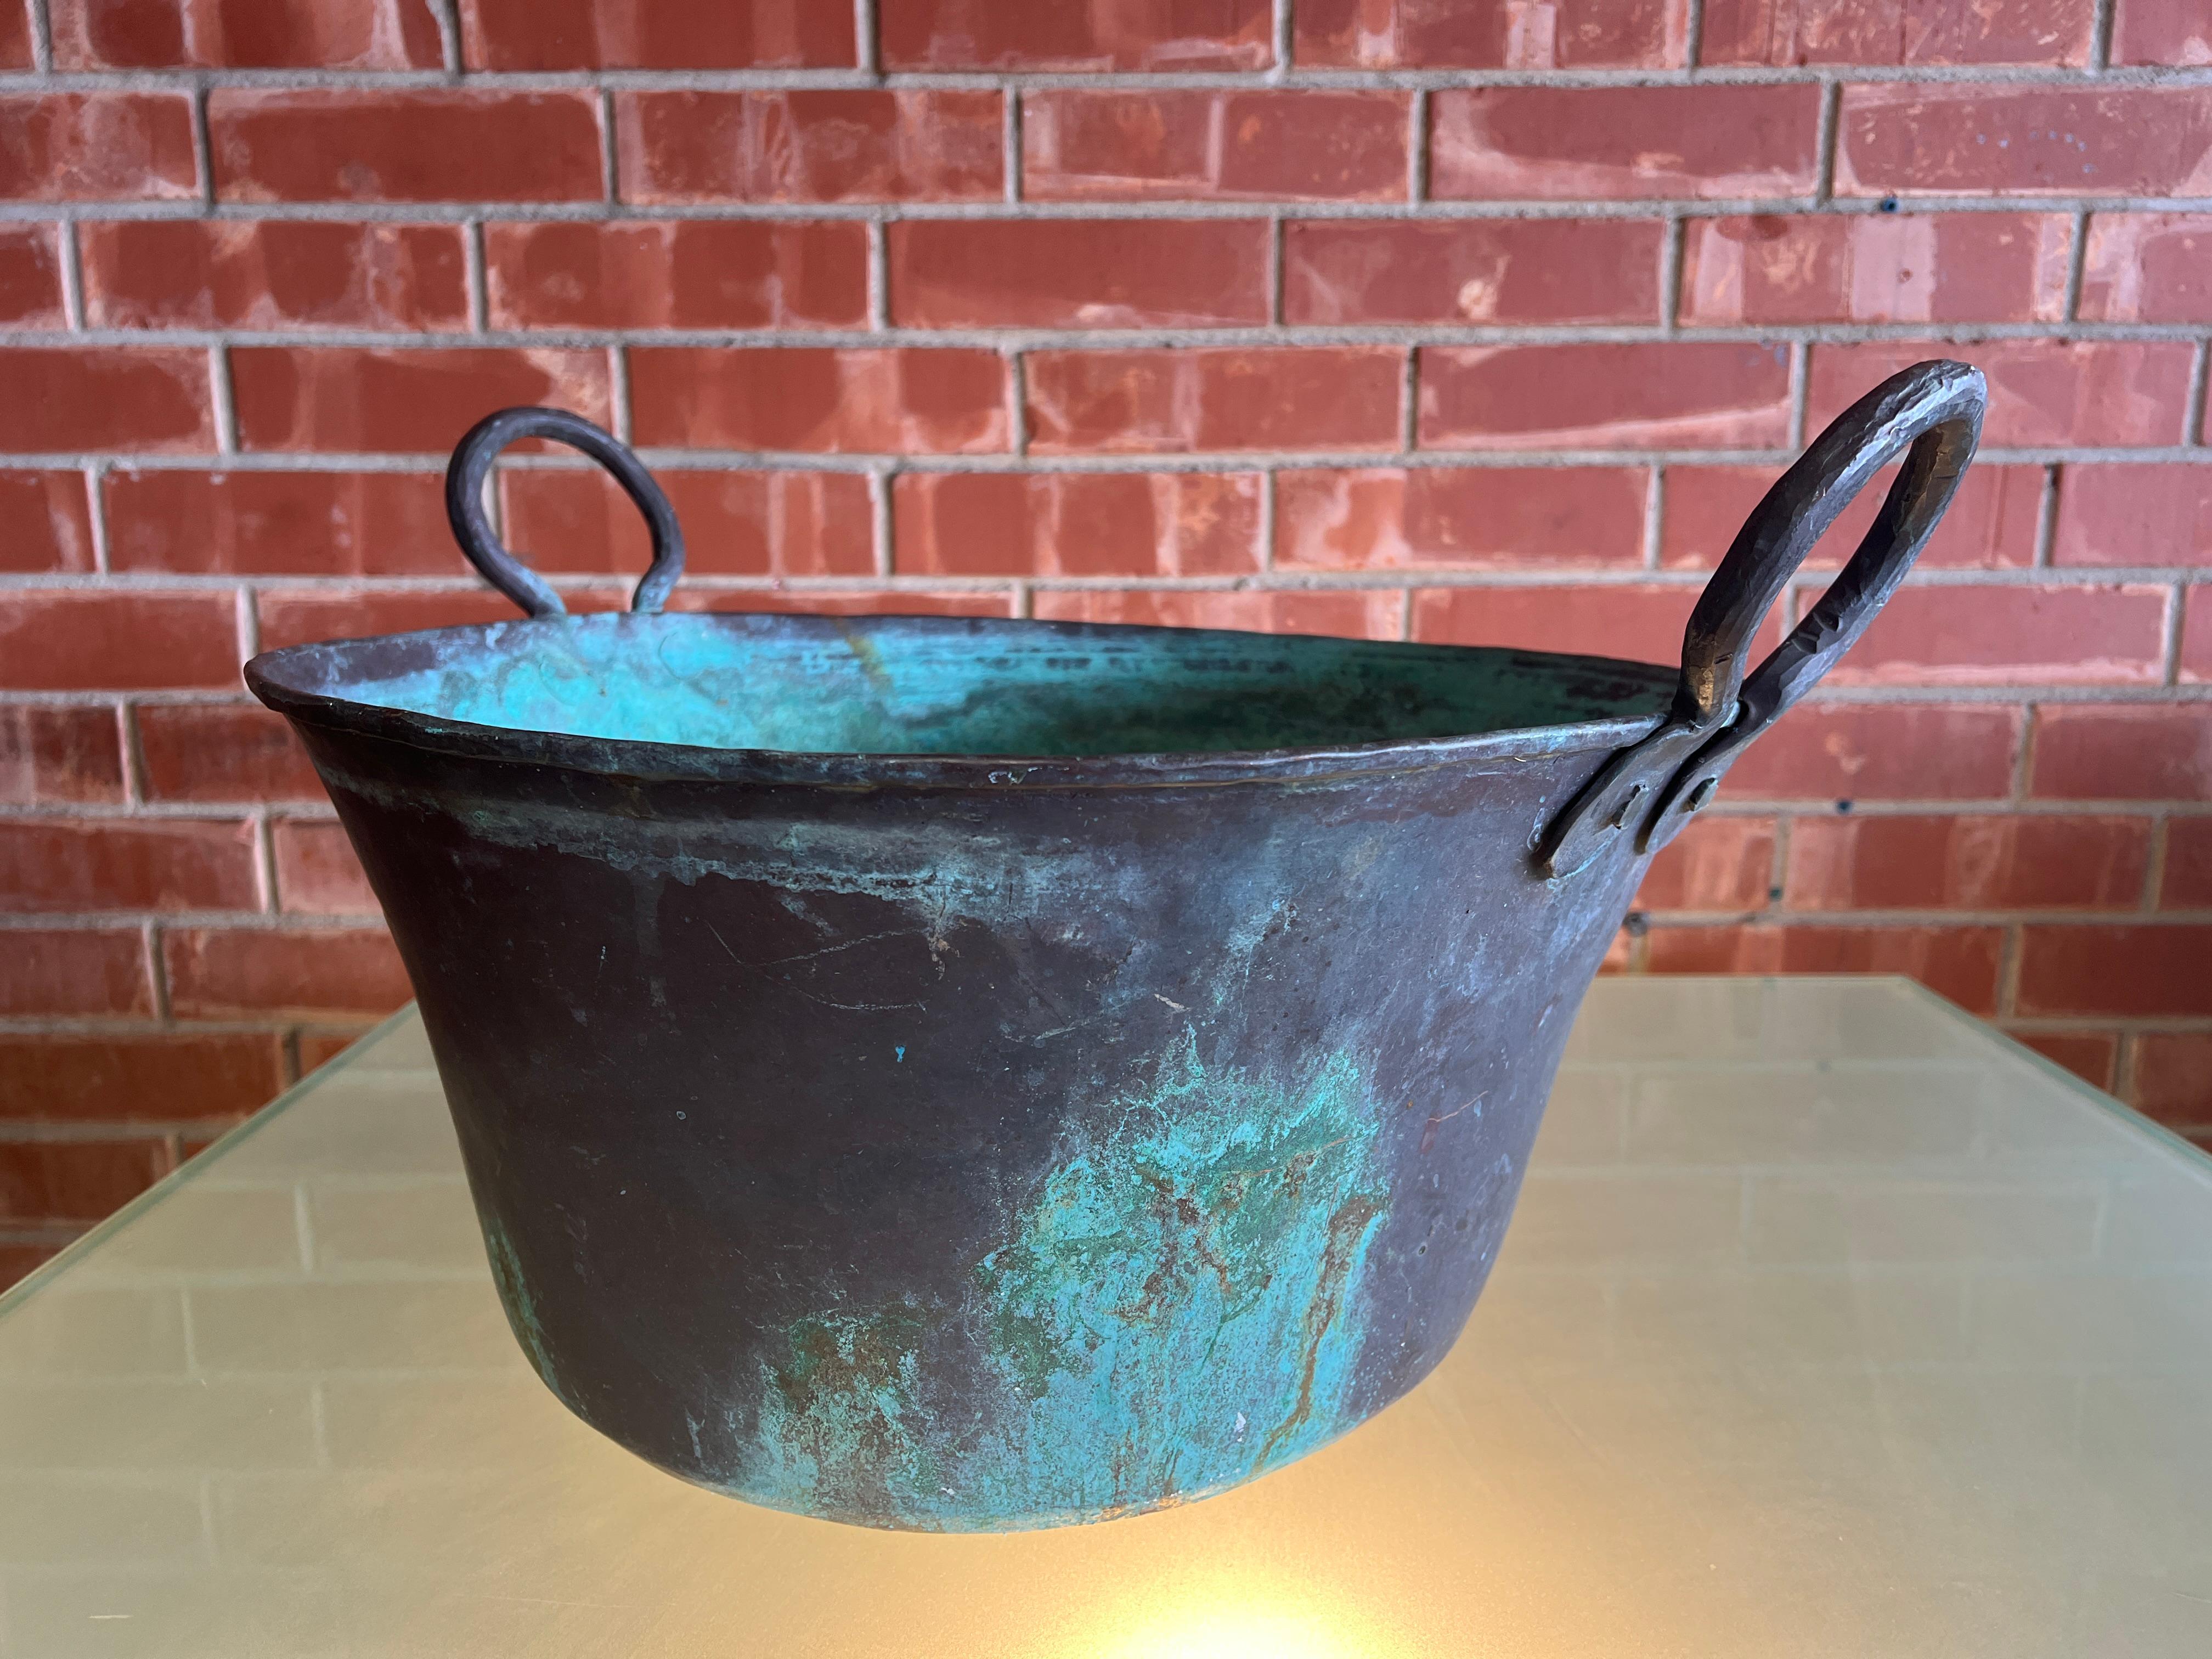 This large hammer copper pot or garden planter boasts circular handles on either side, providing a sturdy grip for effortless lifting. Its surface is adorned with a delightful green patina, both inside and out, adding a touch of rustic charm and